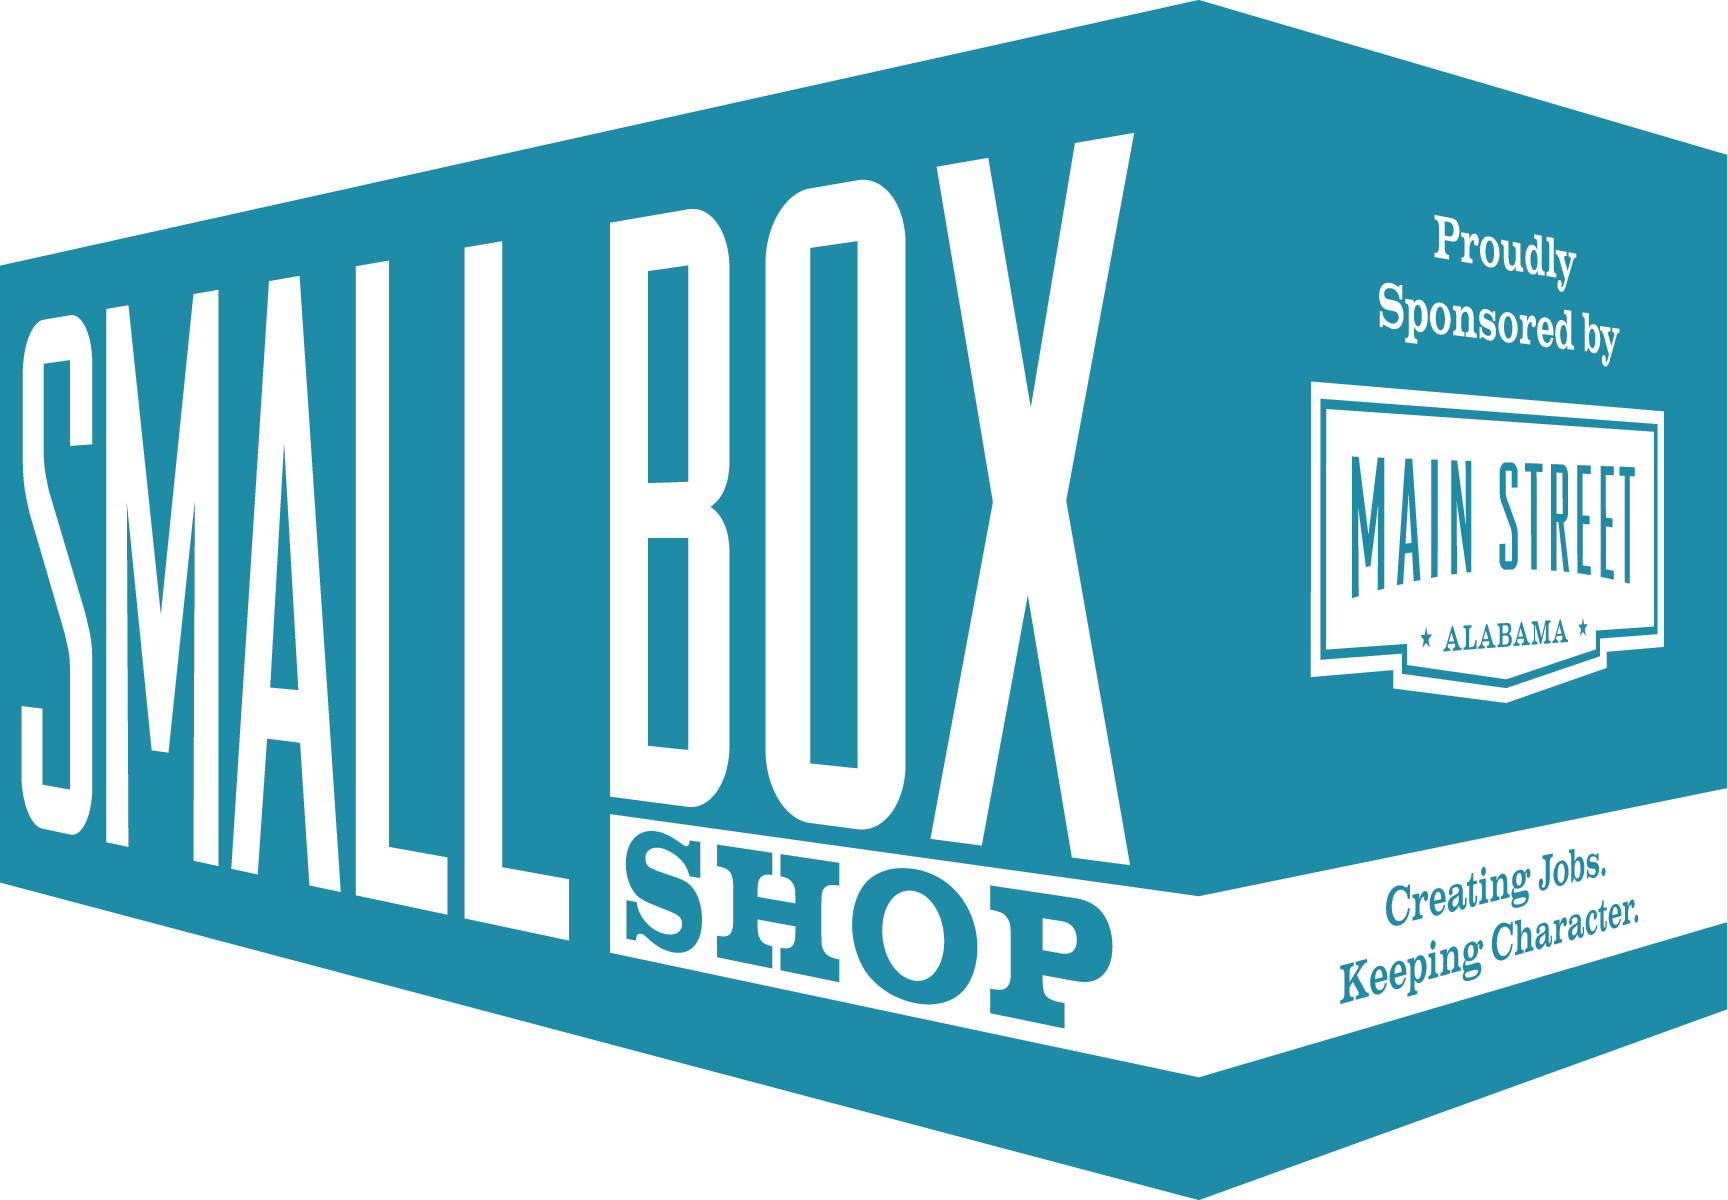 Event Image for Small Box Shop Arrives